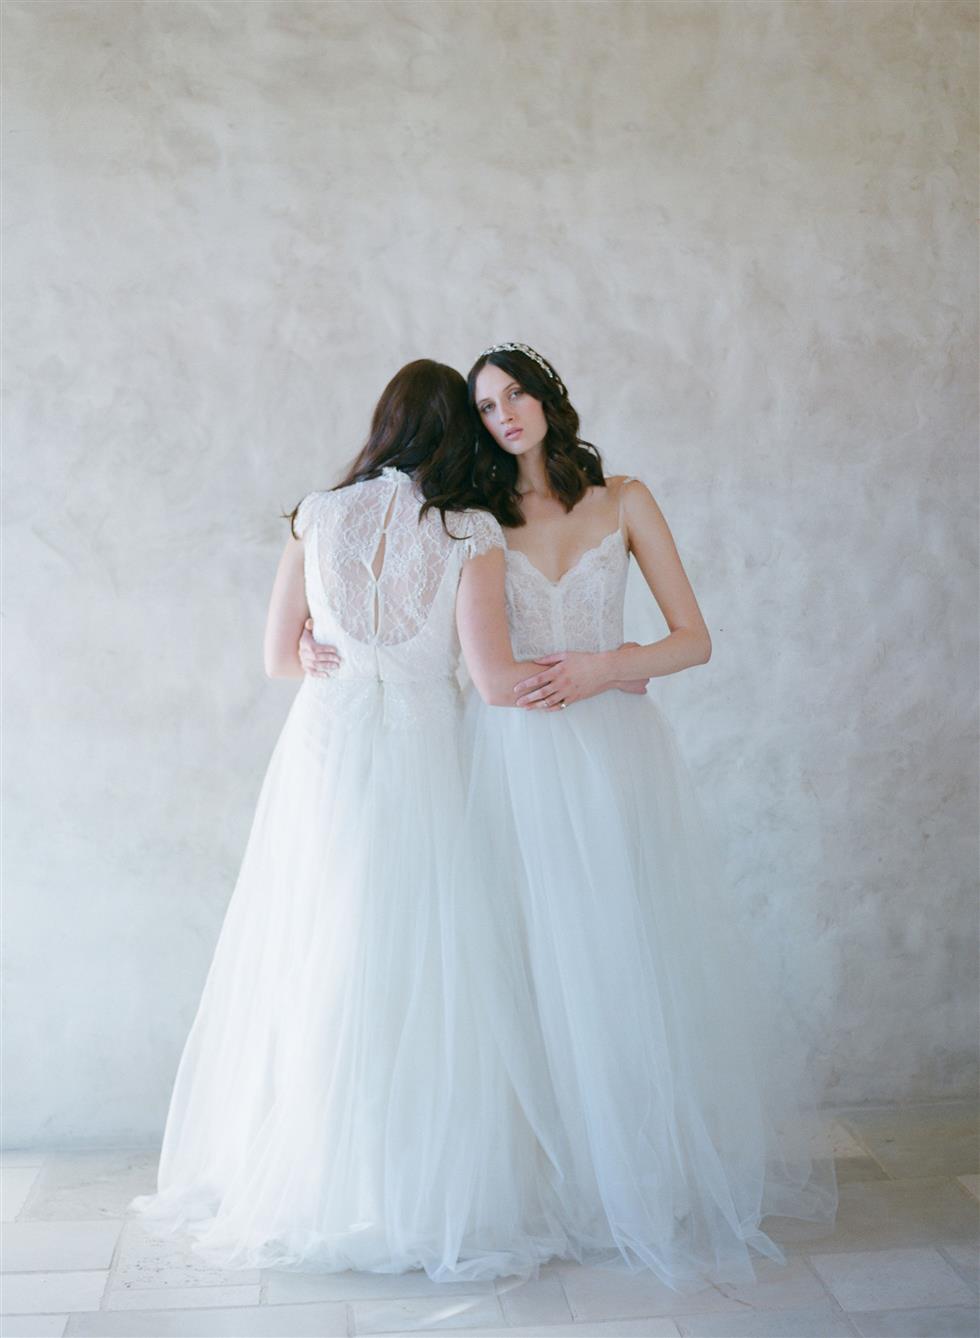 The Beautiful 2015 Bridal Collection from Myra Callan for Twigs & Honey